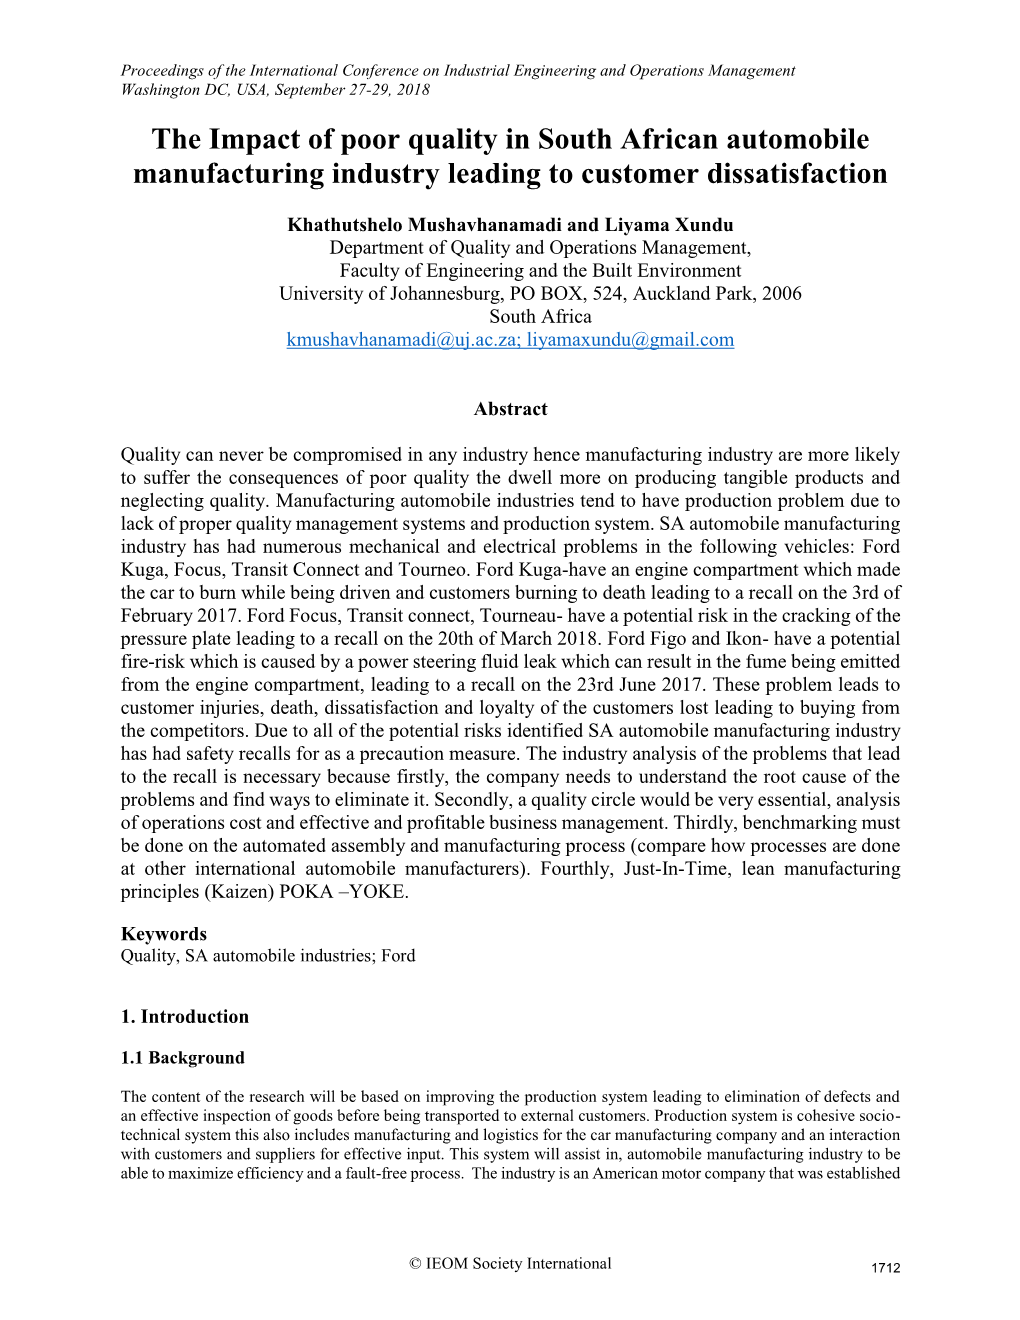 ID 453 the Impact of Poor Quality in Automobile Manufacturing